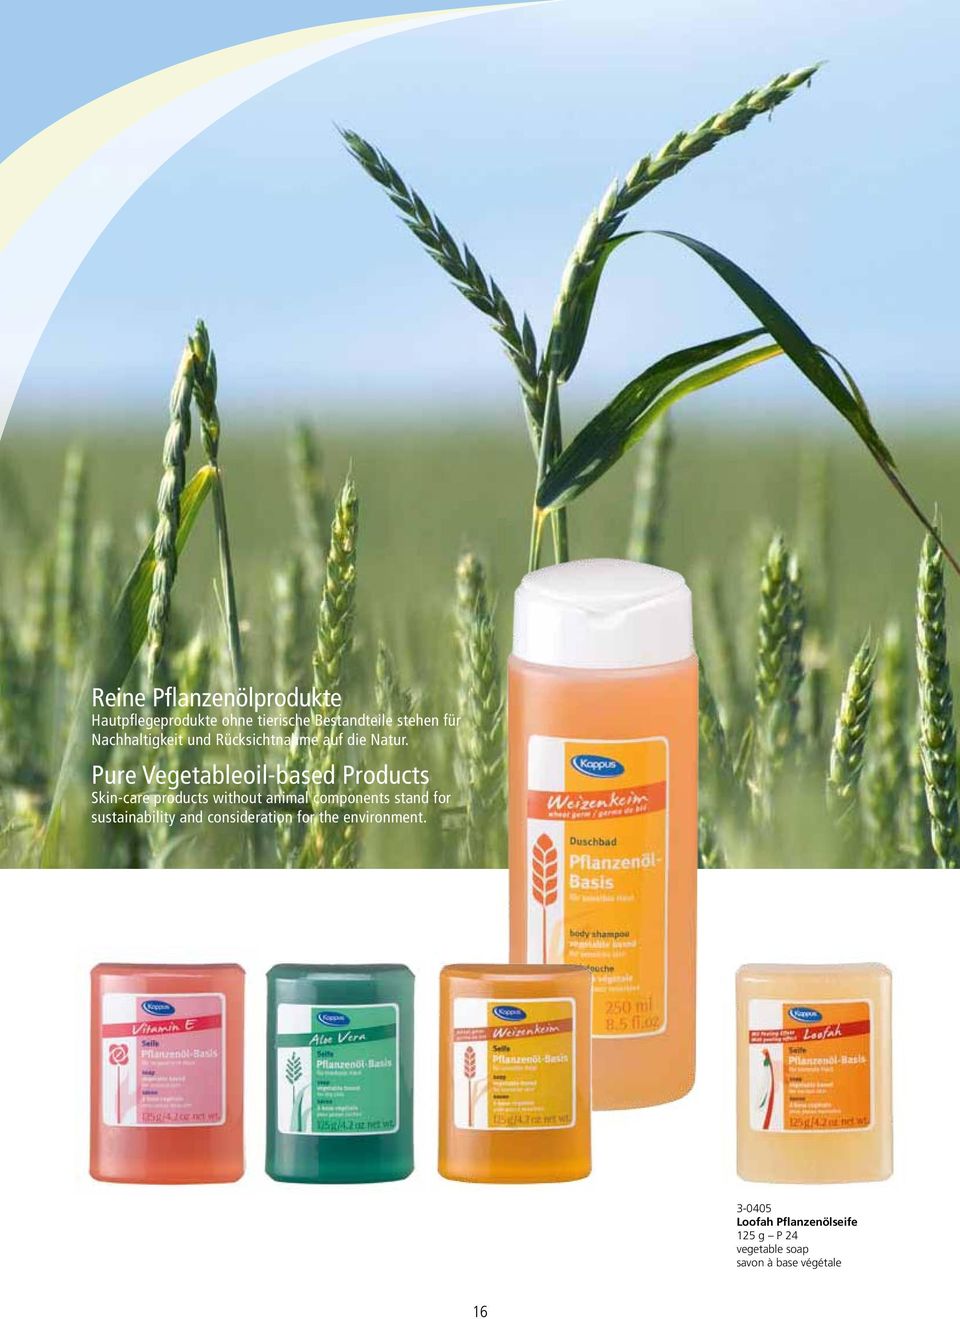 Pure Vegetableoil-based Products Skin-care products without animal components stand for